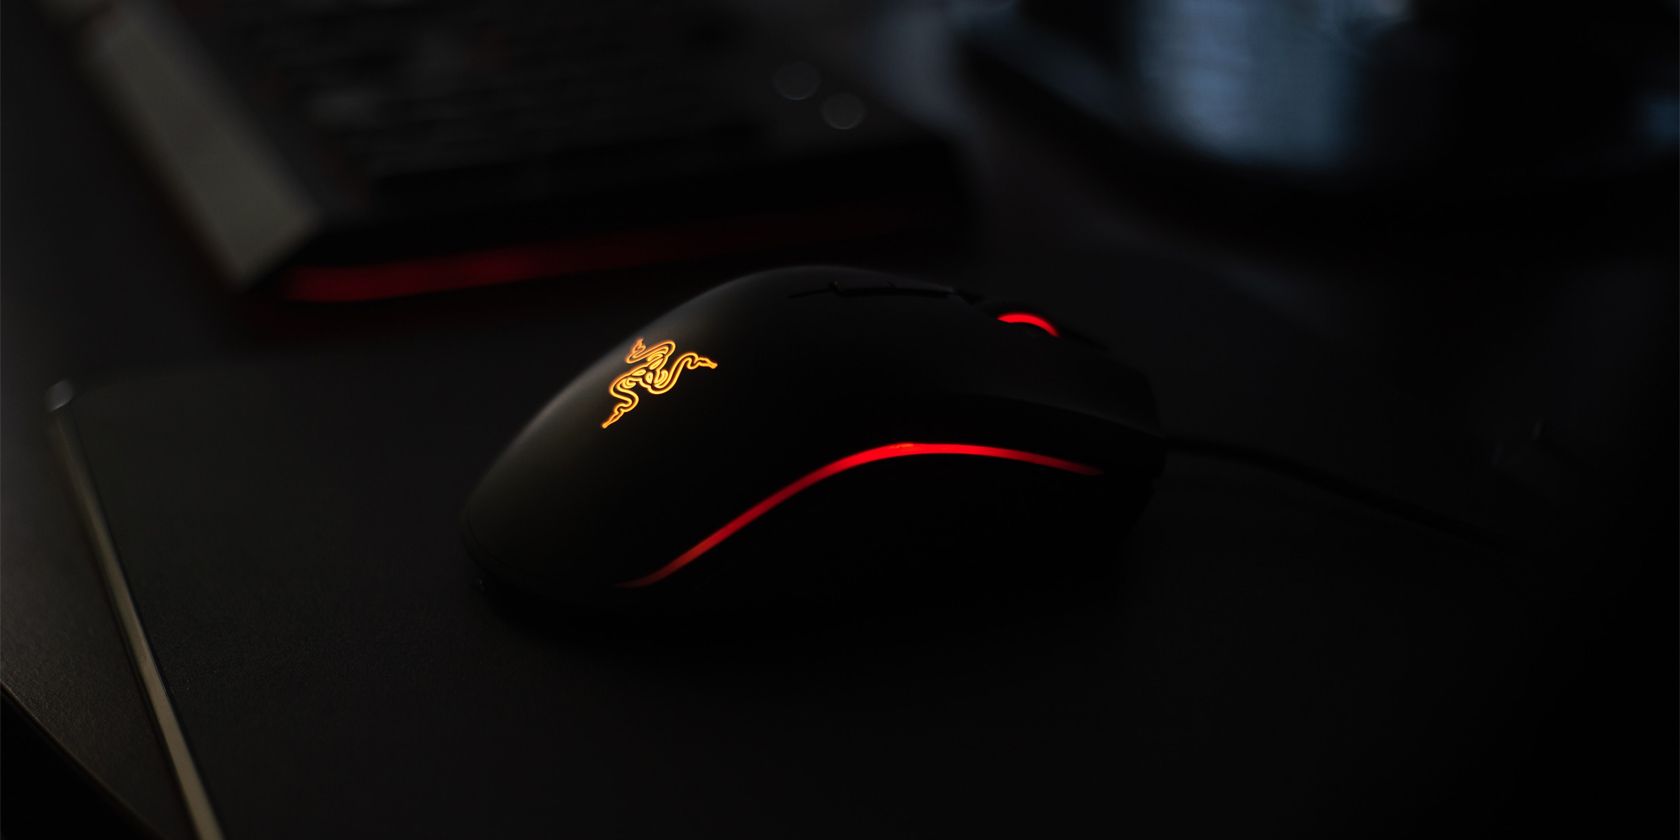 FPS Gaming Mouse from Razer